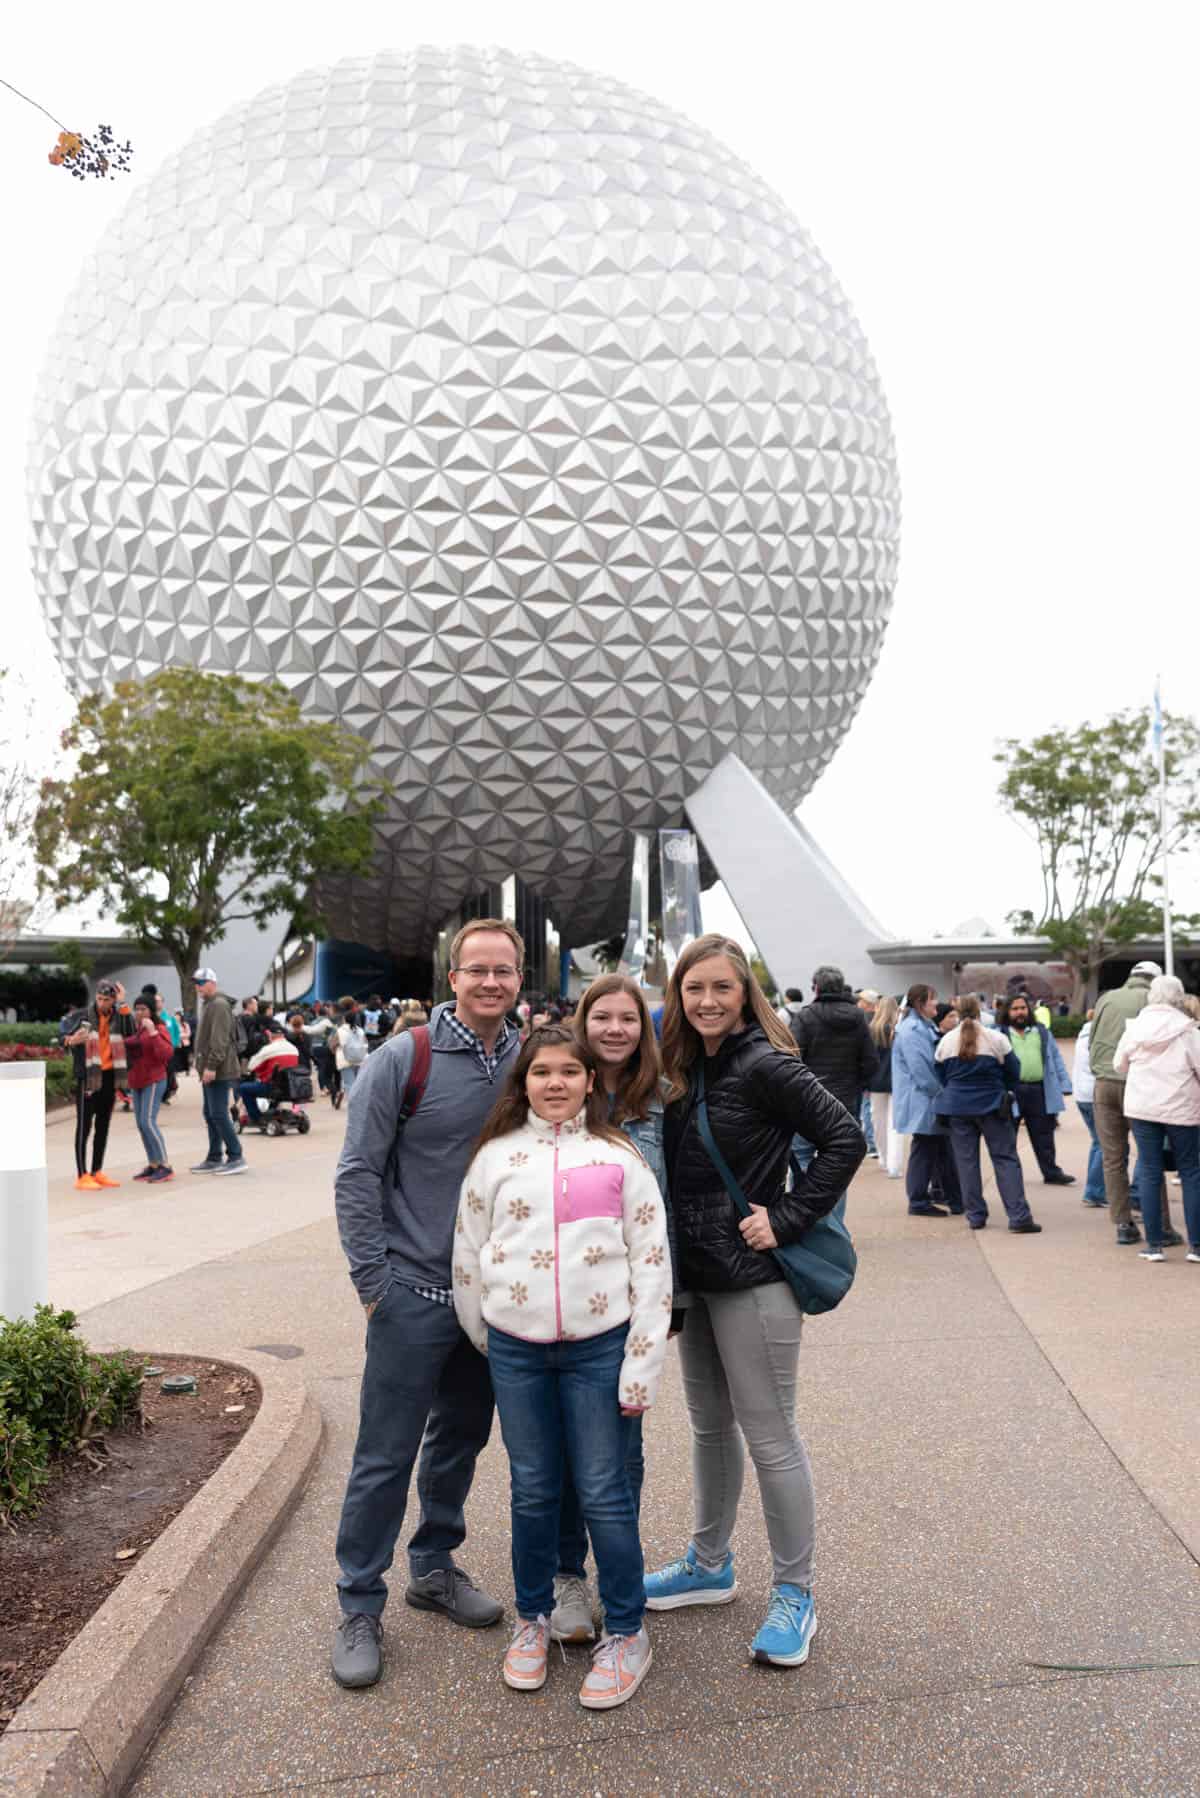 What We Saw, Ate, and Did at Epcot at Walt Disney World